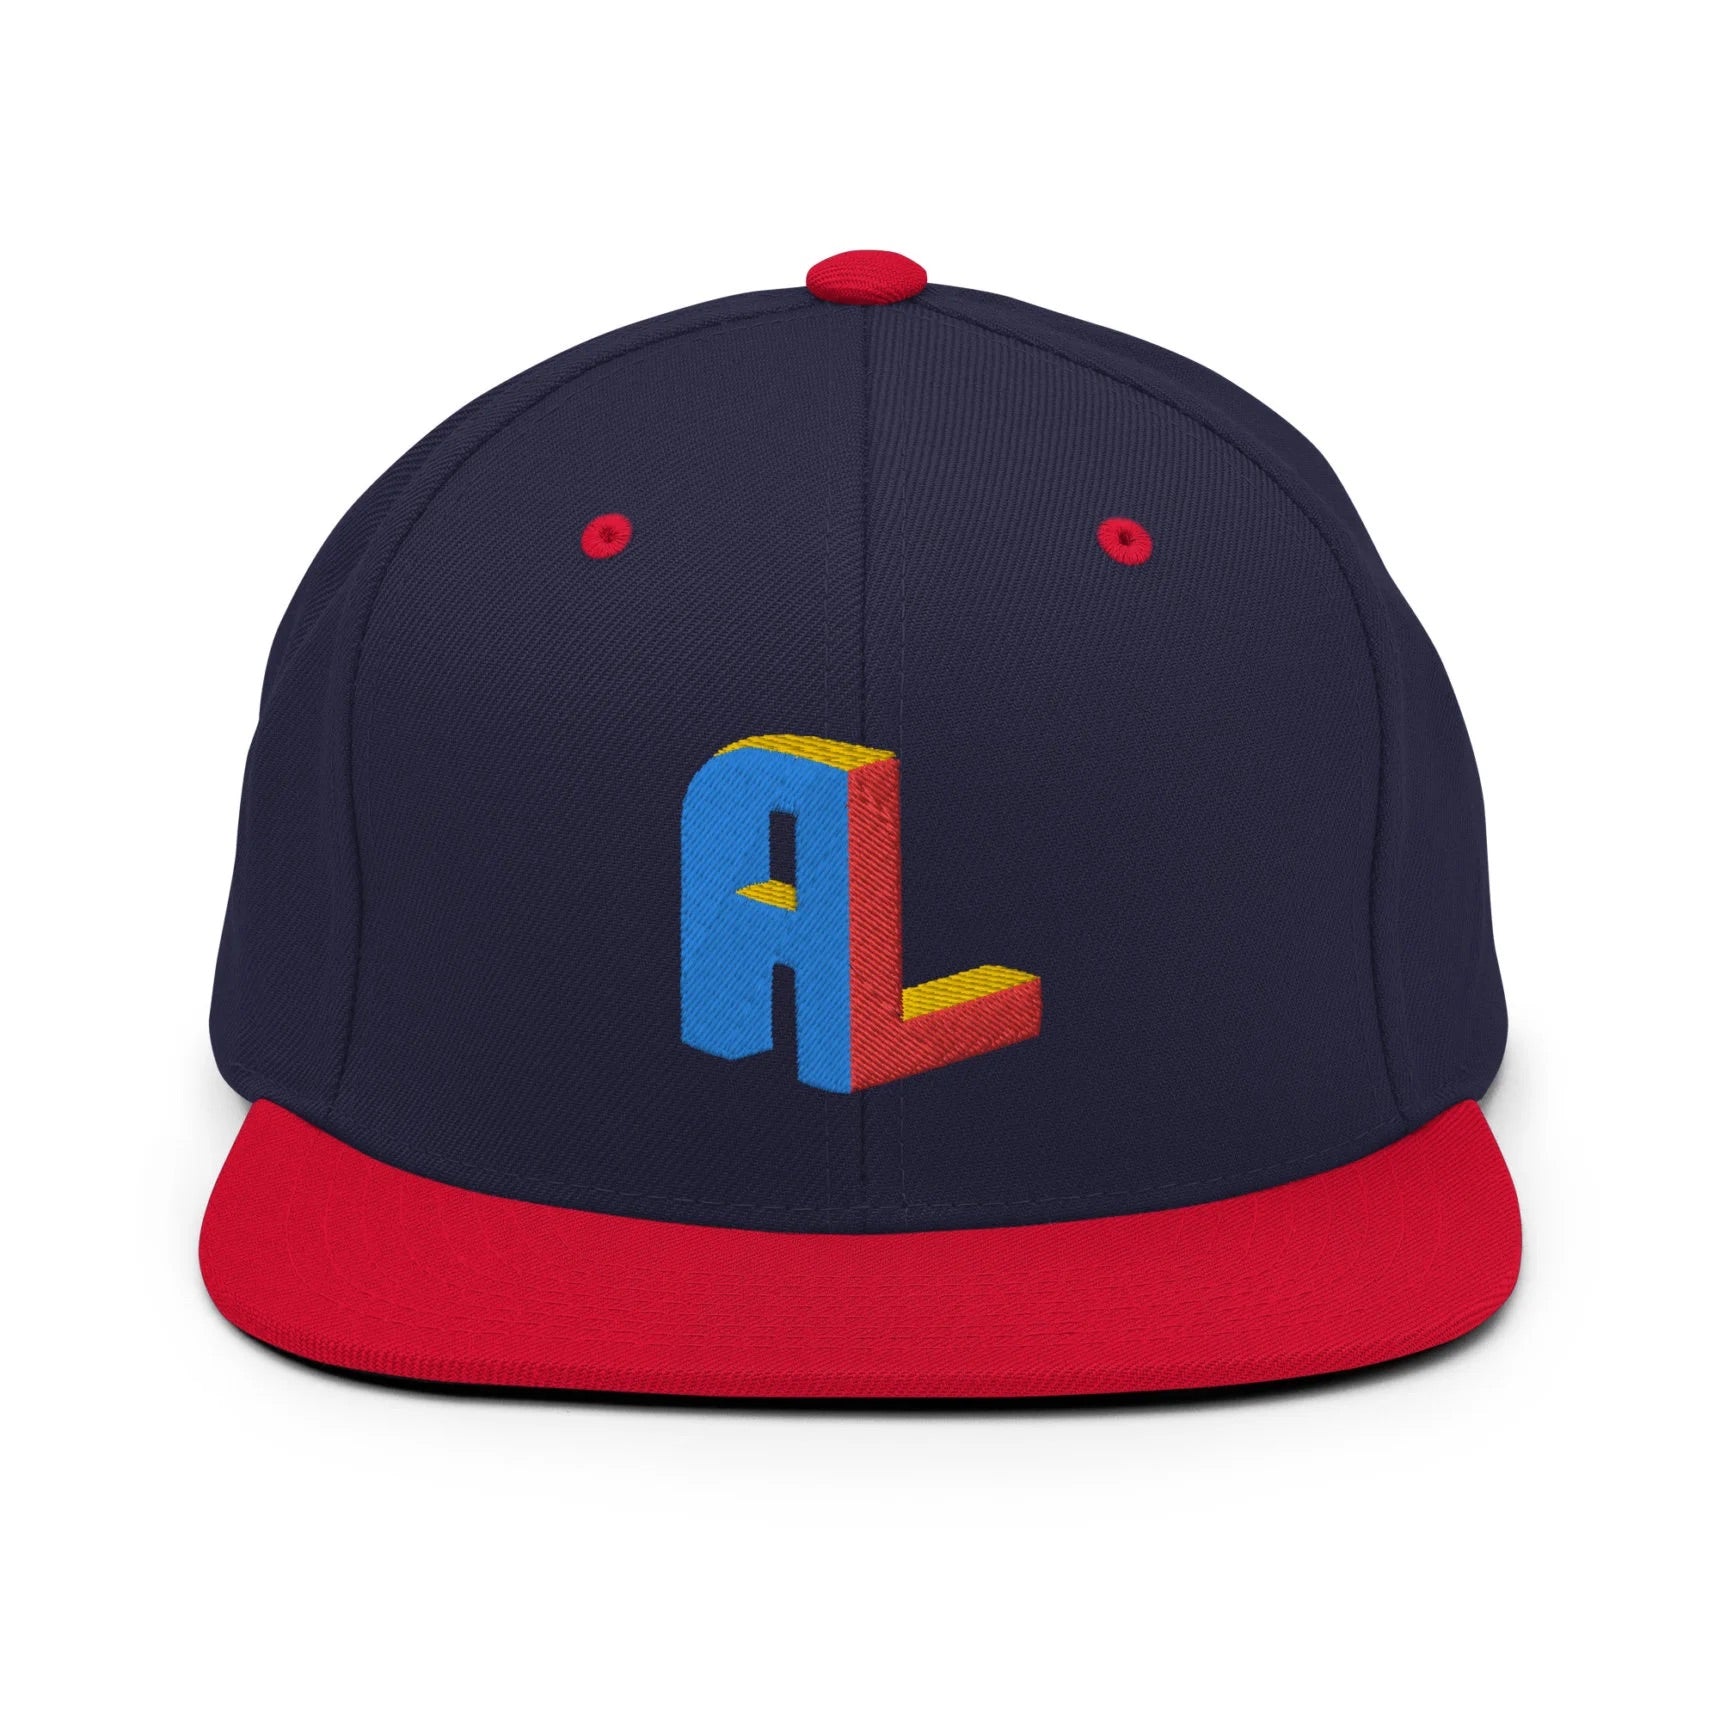 Ance Larmstrong ShowZone snapback hat in navy with red brim and accents